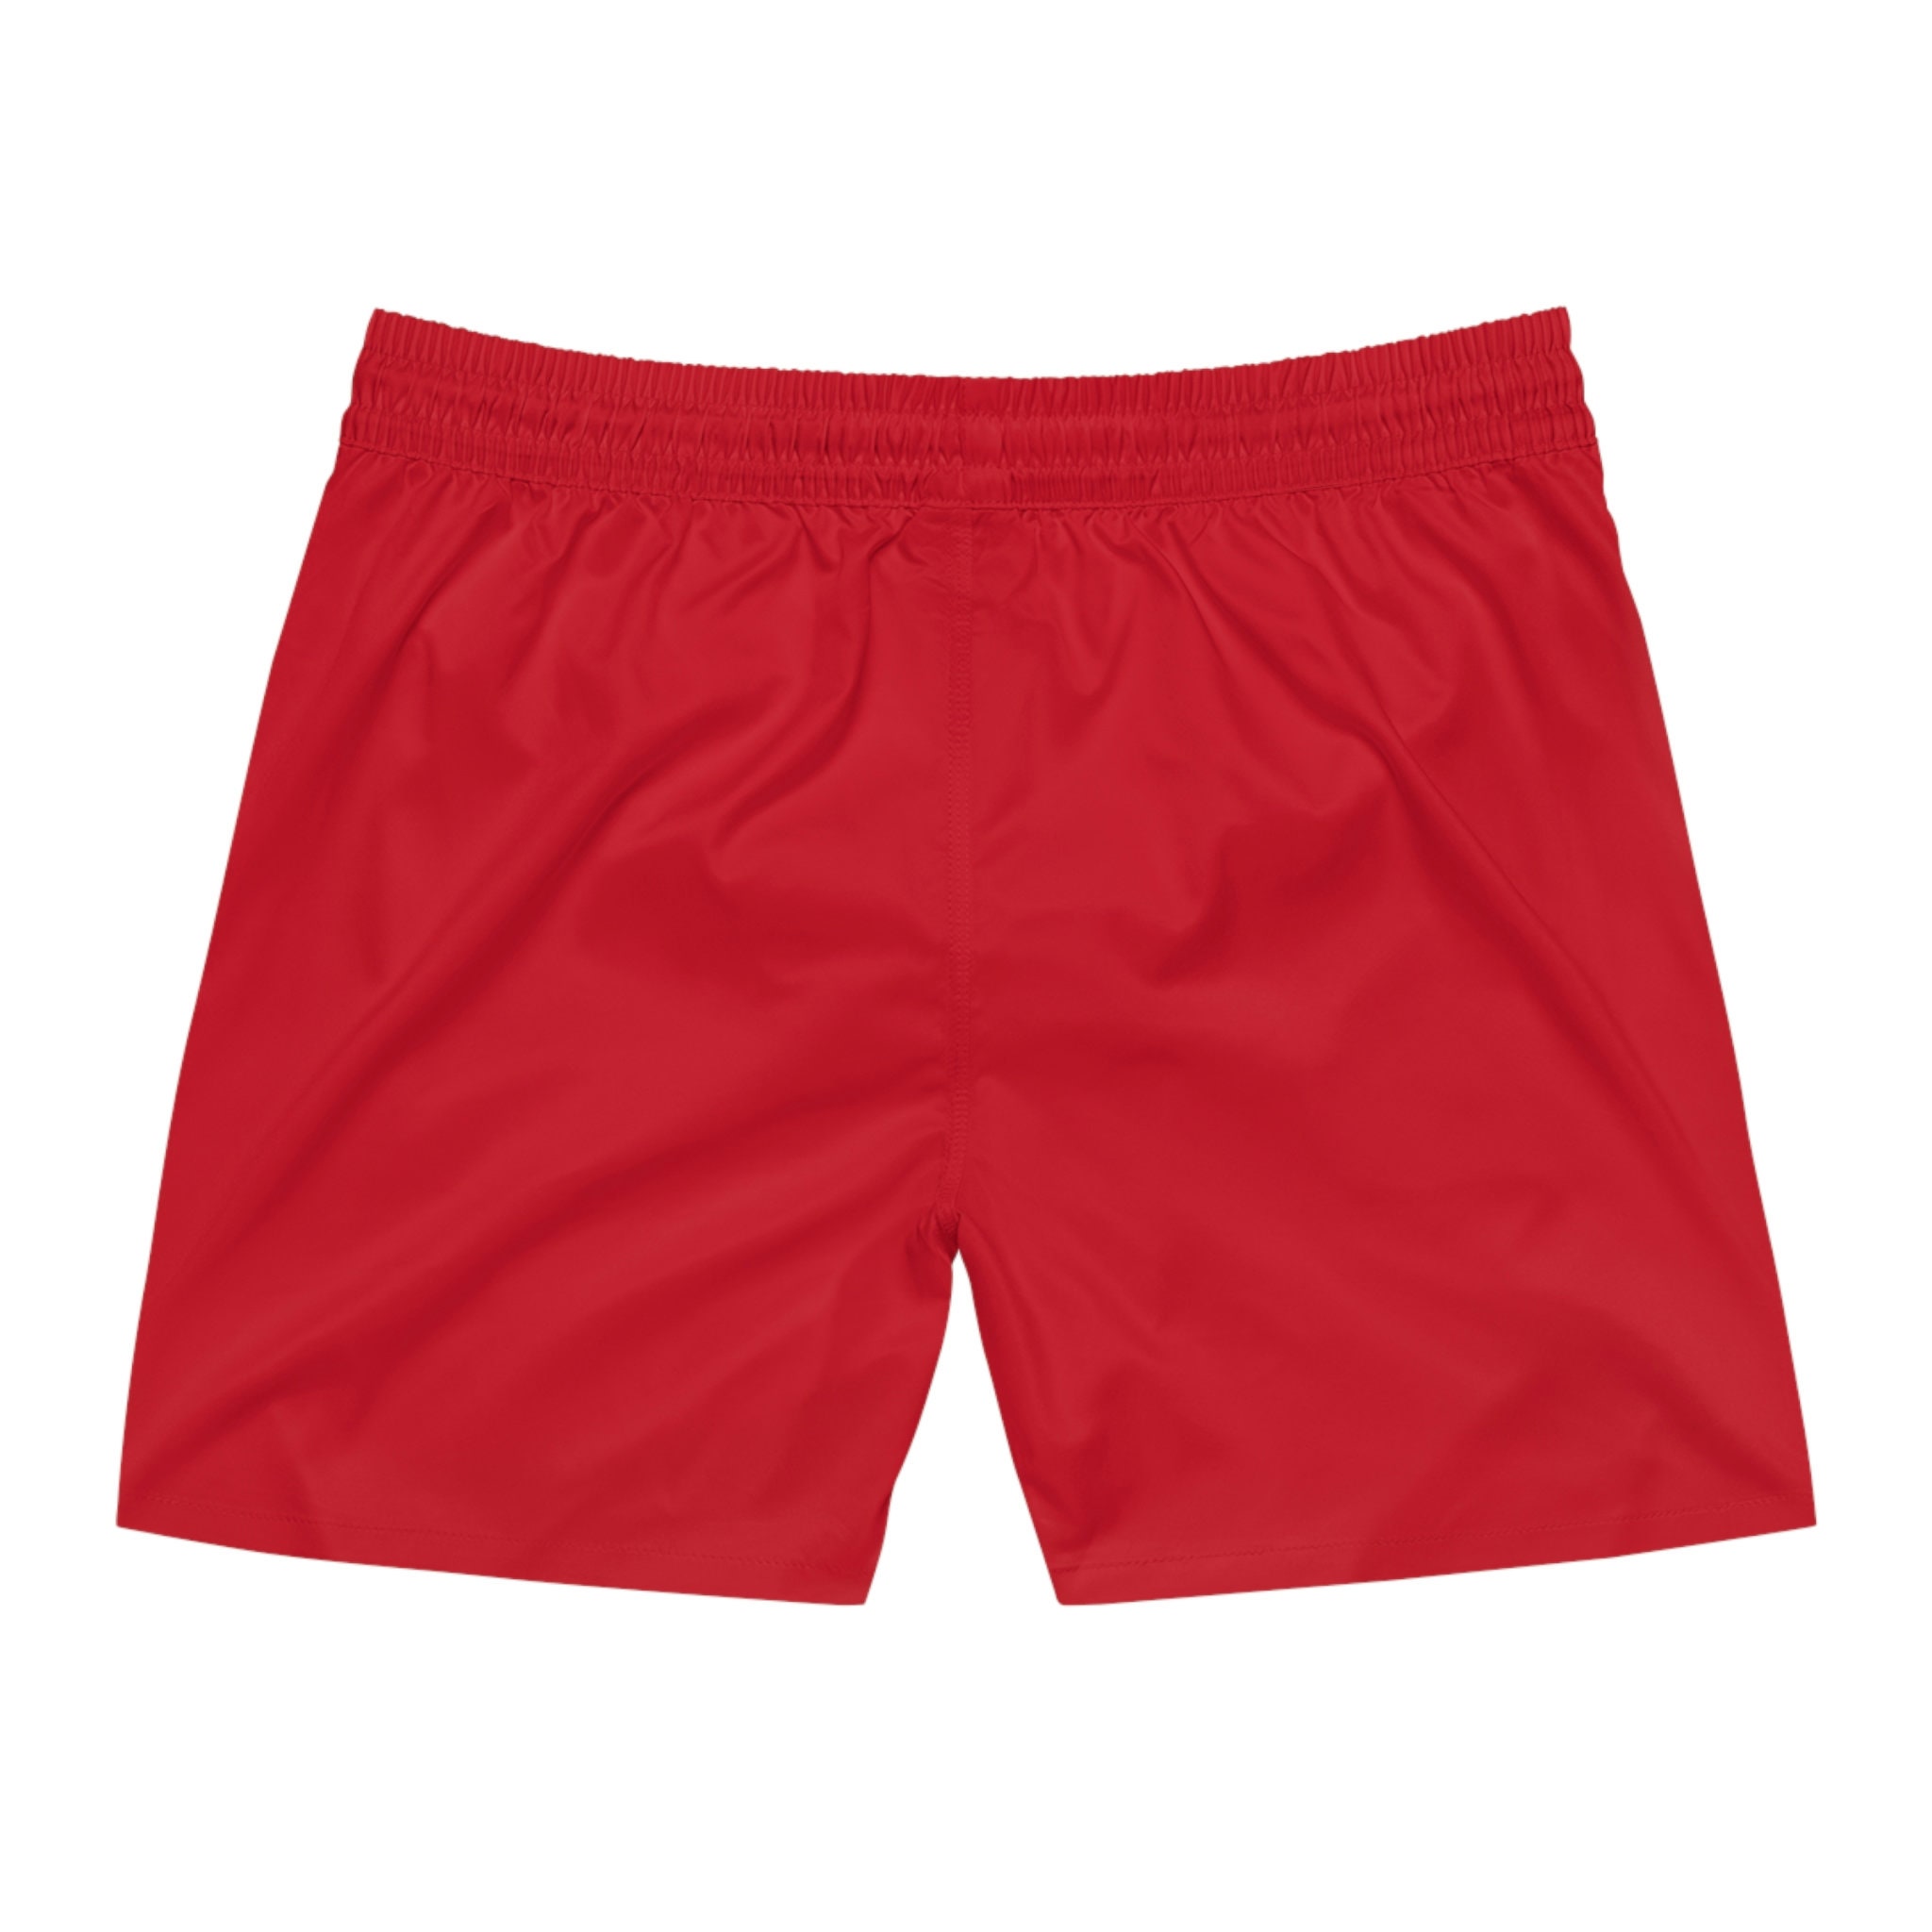 Mickey Mouse with surfboard Men's Mid-Length Swim Shorts